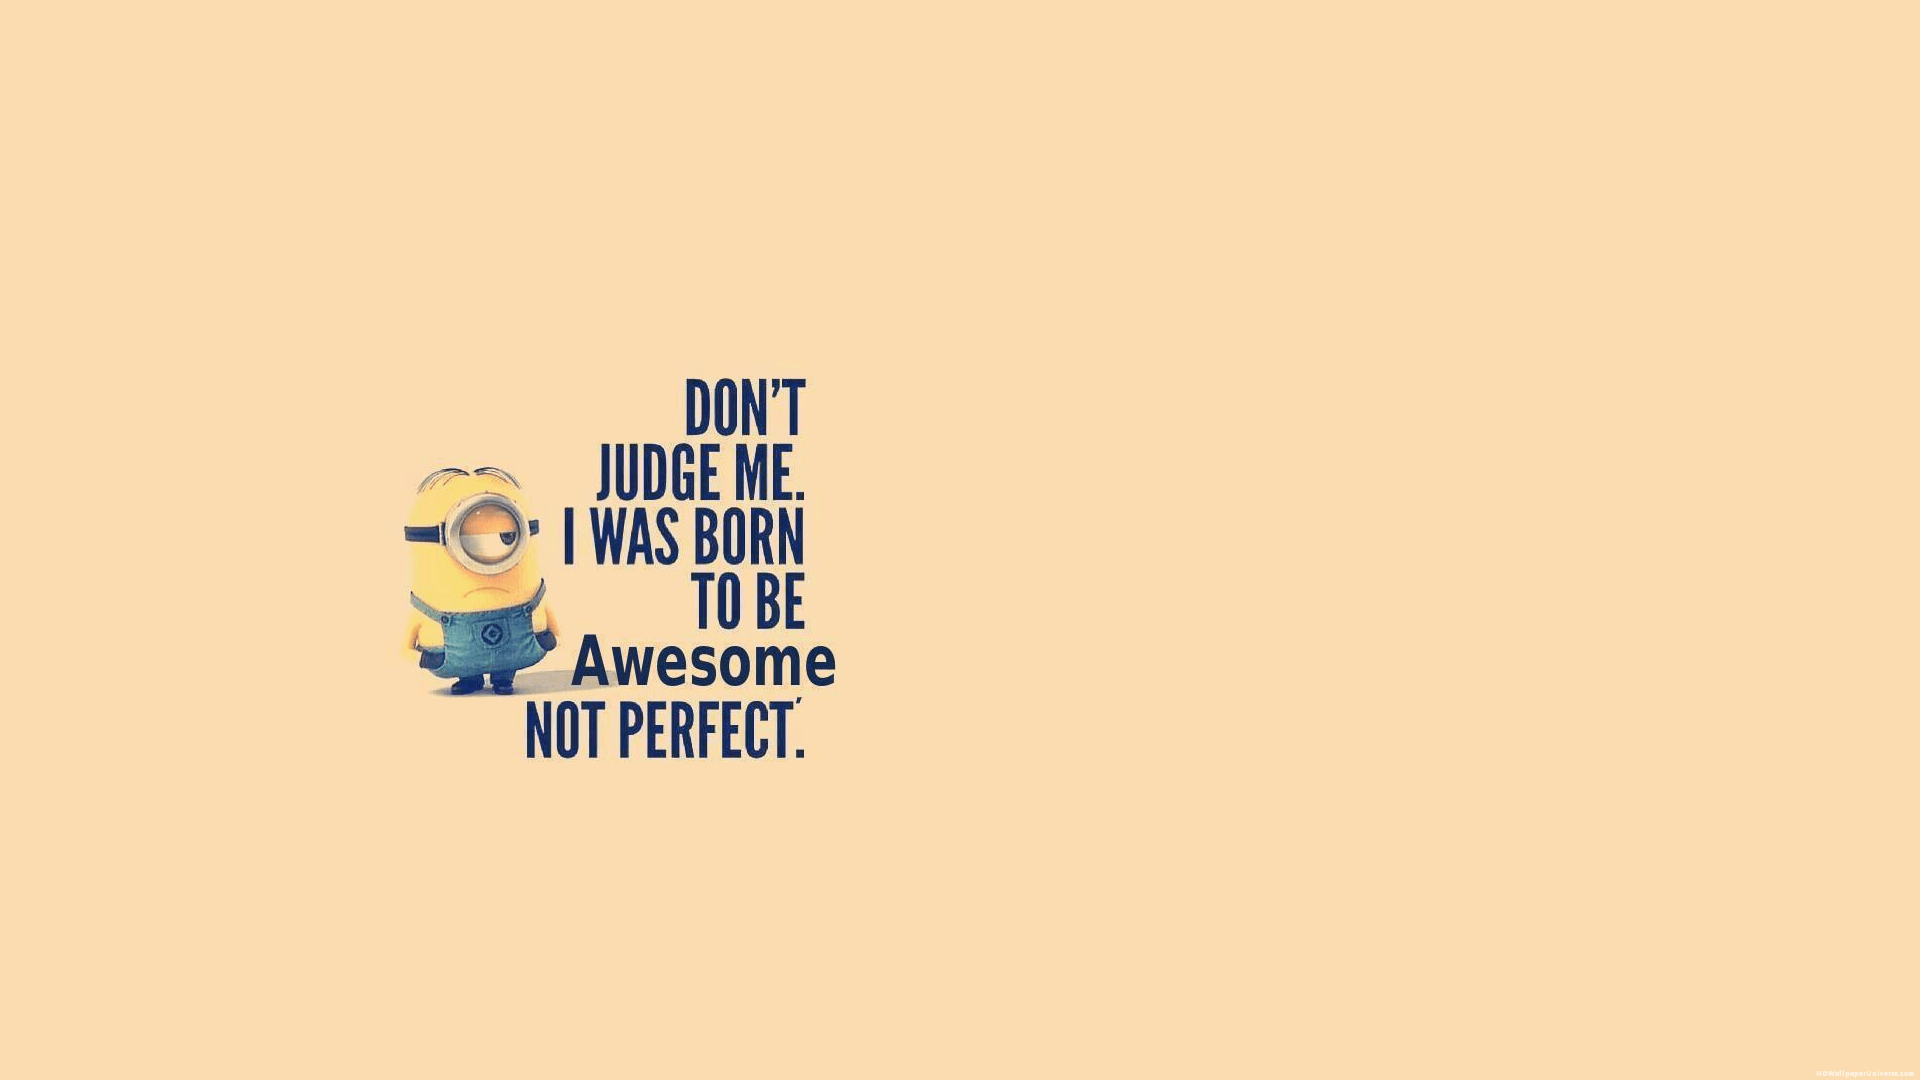 Funny Minion Quote HD Wallpaper About Awesomeness. Foolhardi